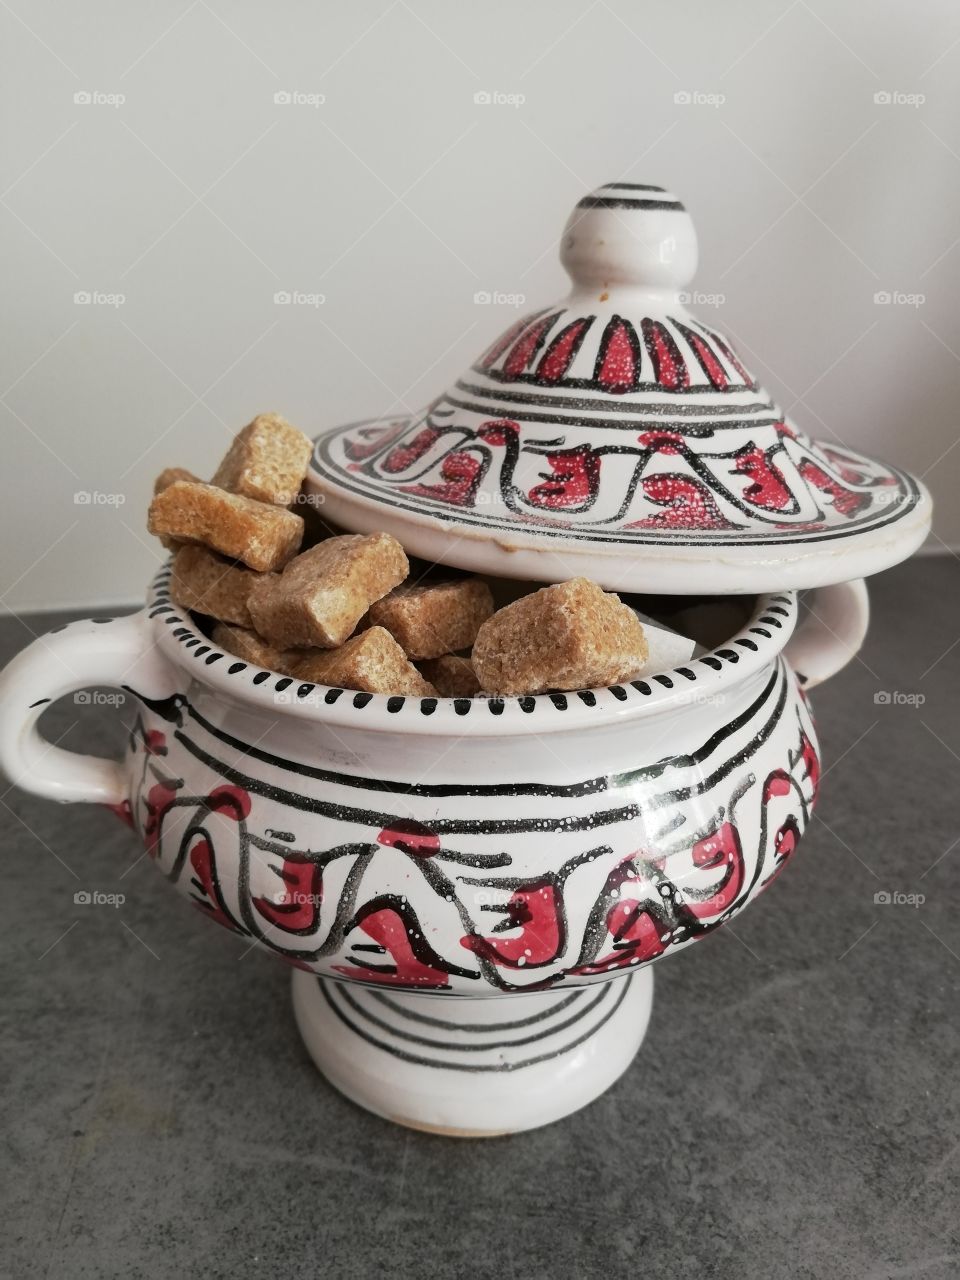 Multicoloured and patterned sugar container with handles and striped top and leg is full of white and brown sugar